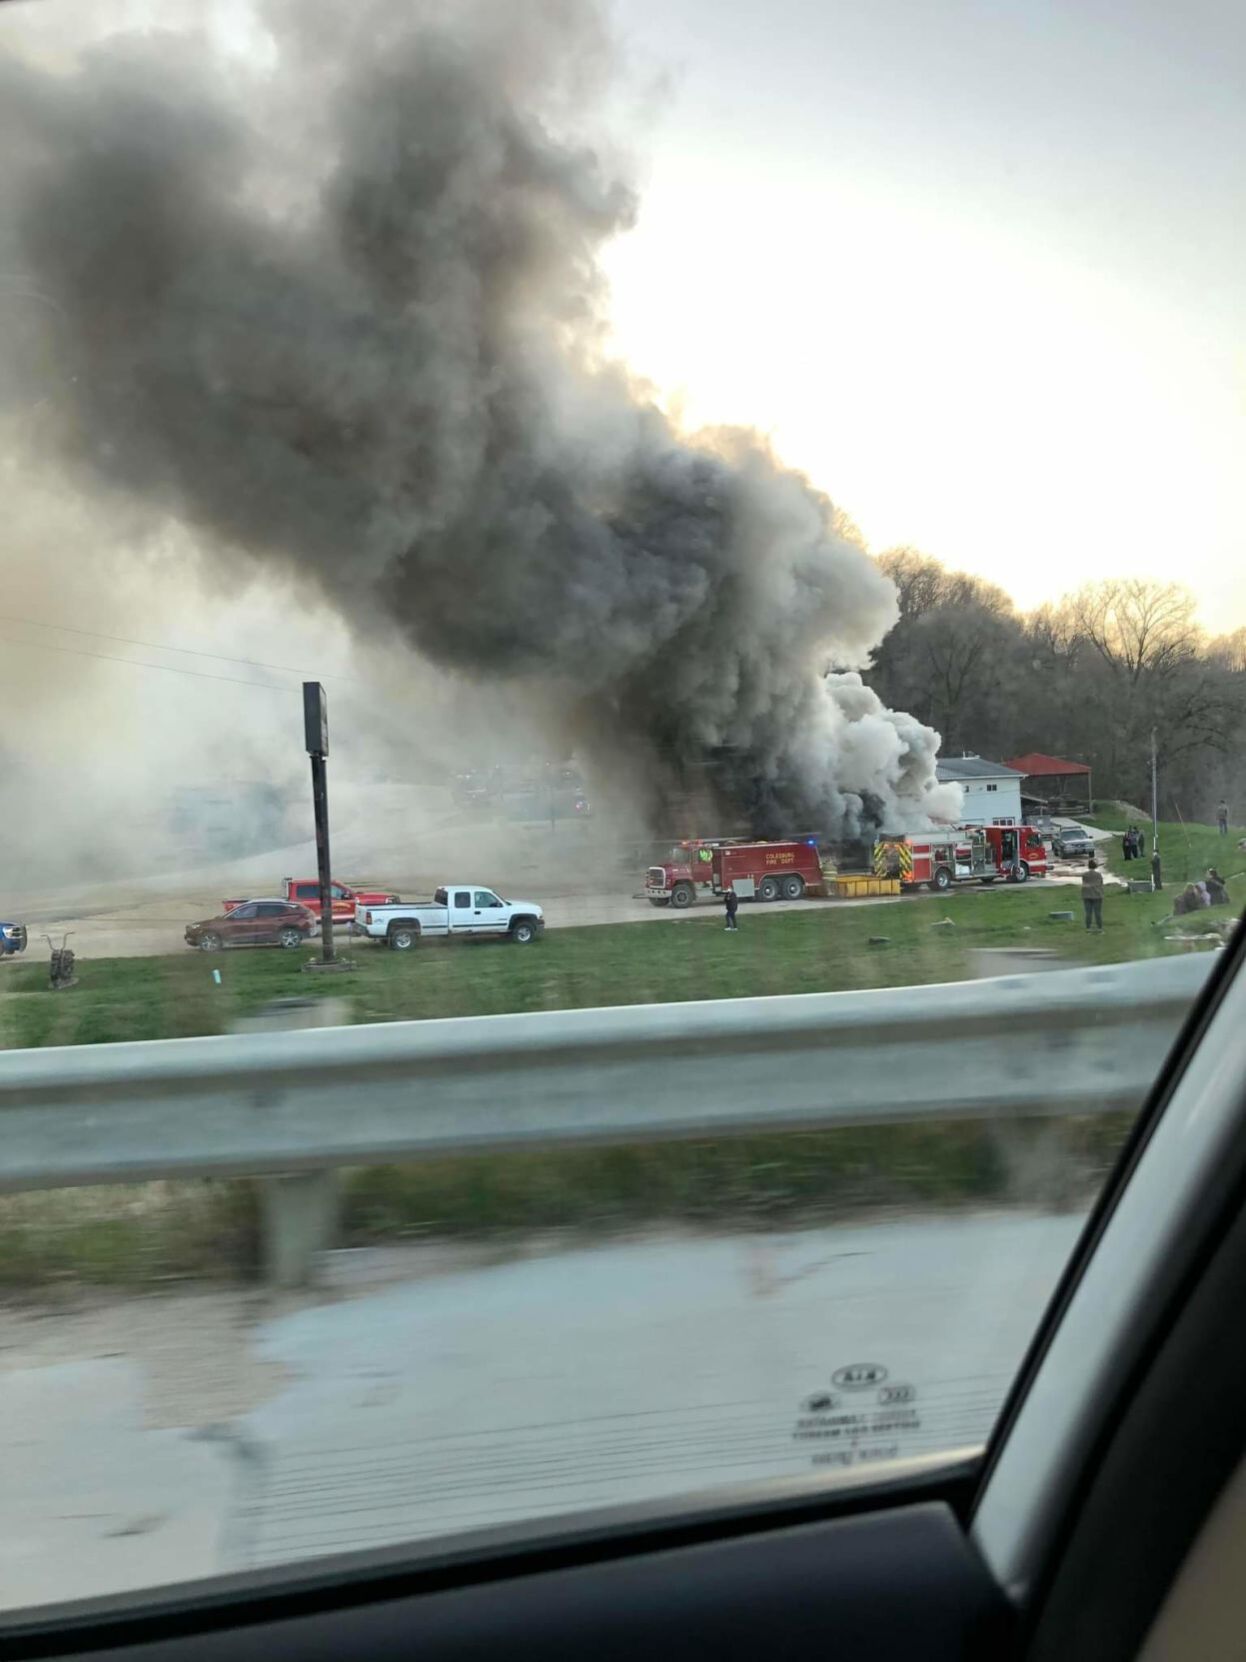 A fire destroyed Bootleggers River Tavern in Millville, Iowa, on Tuesday night.     PHOTO CREDIT: Guttenberg Fire Department